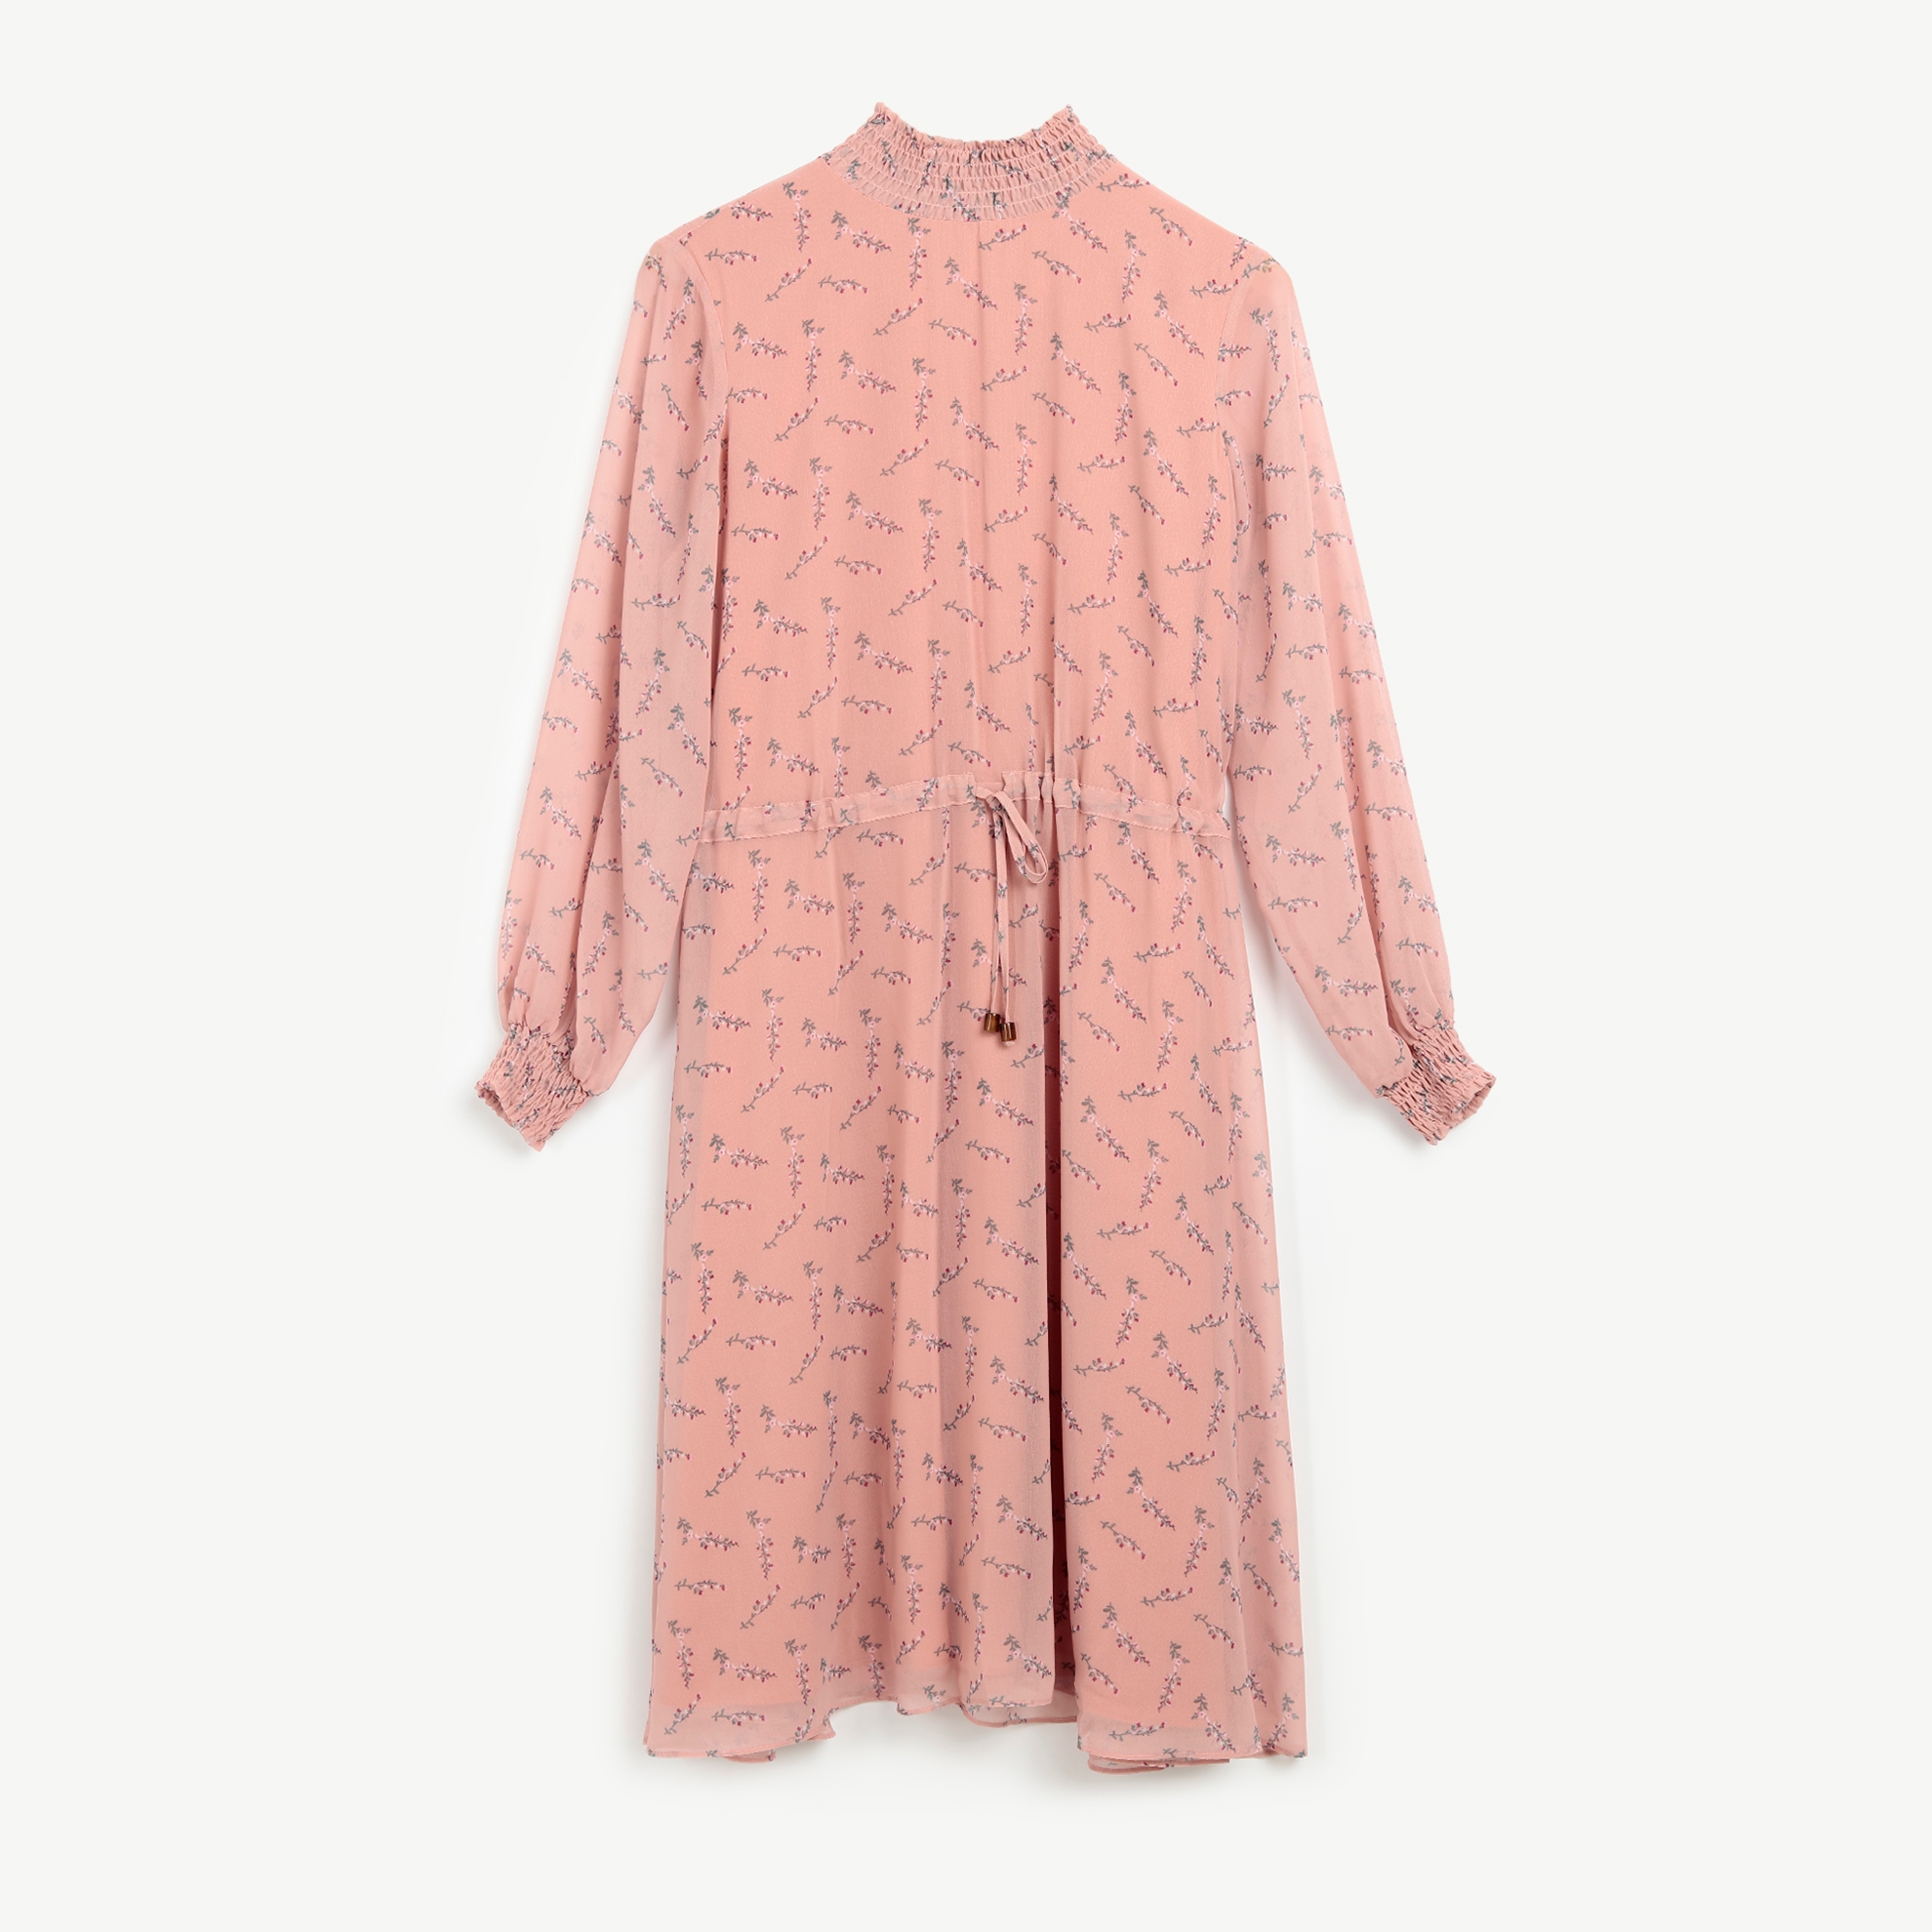 Ruffled Dress With Long Sleeves